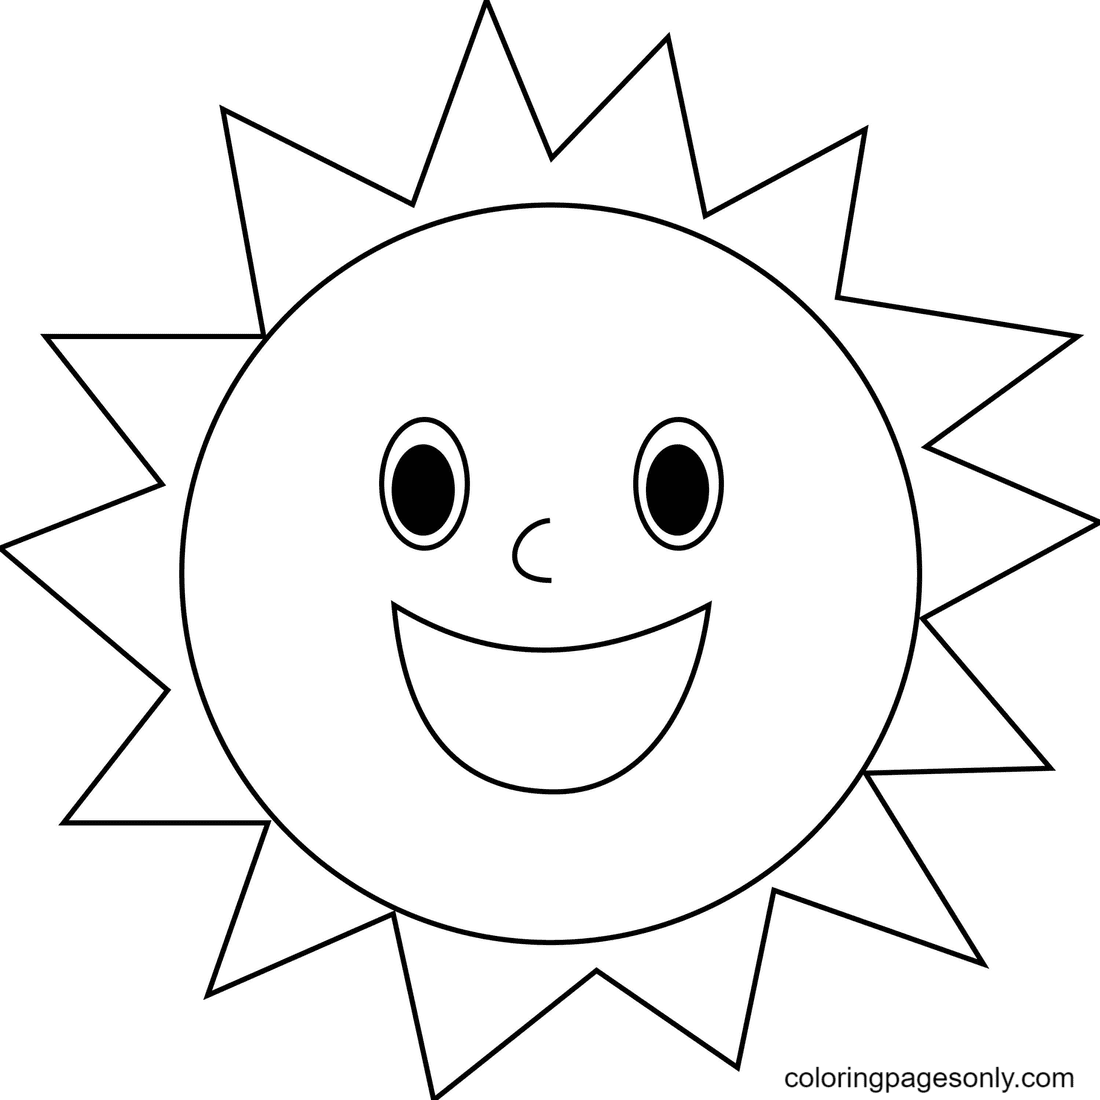 Sun coloring pages printable for free download